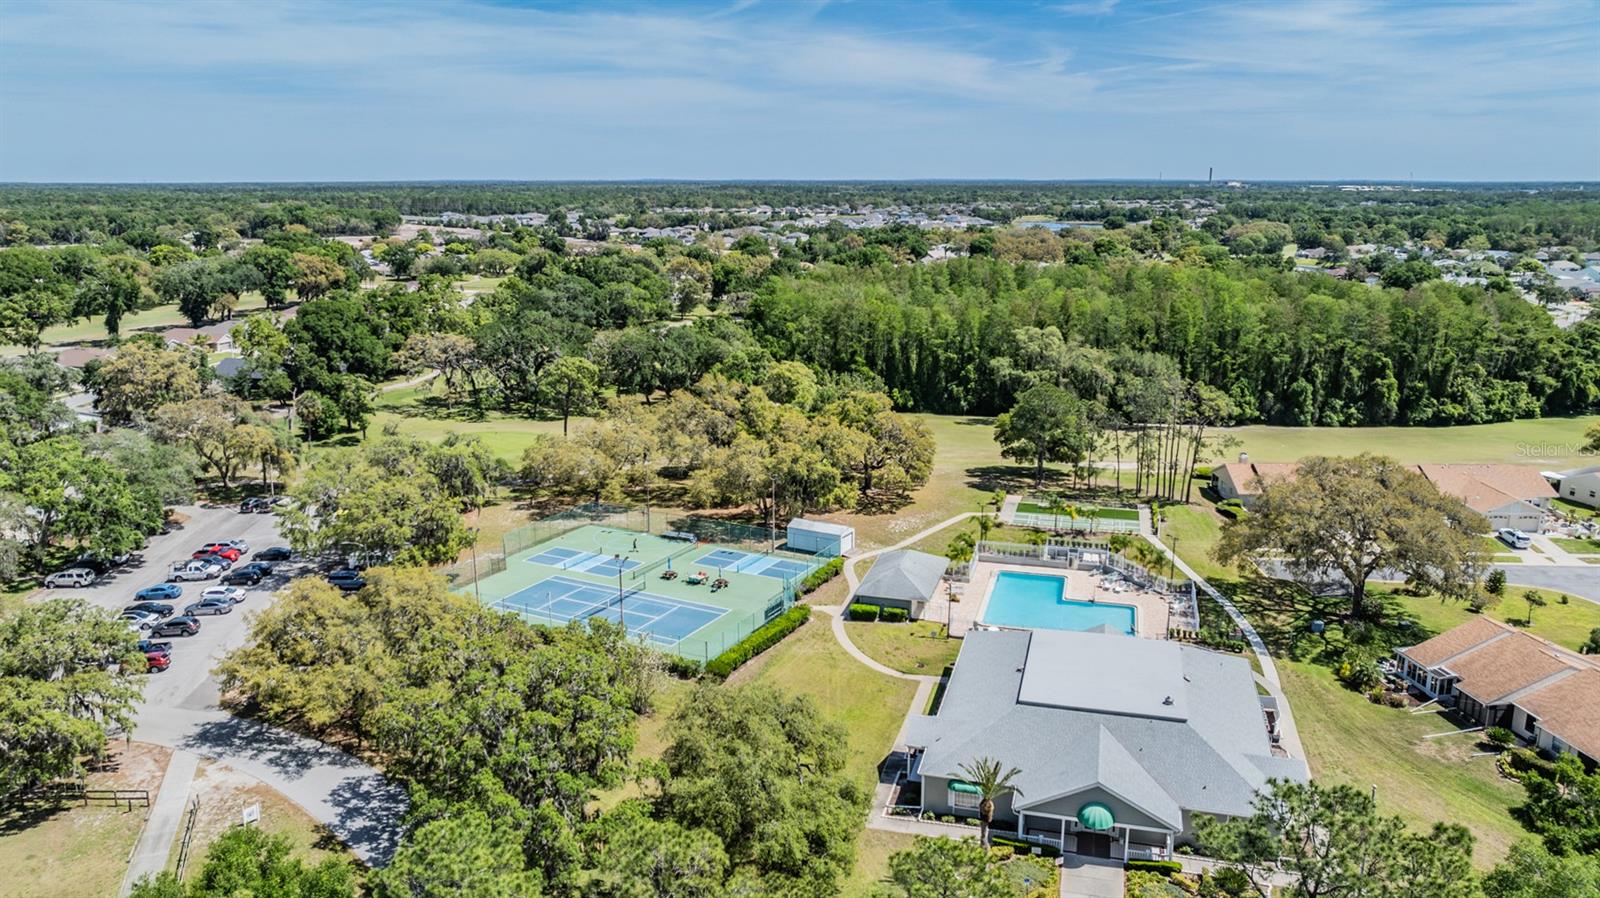 Clubhouse, pool and tennis courts